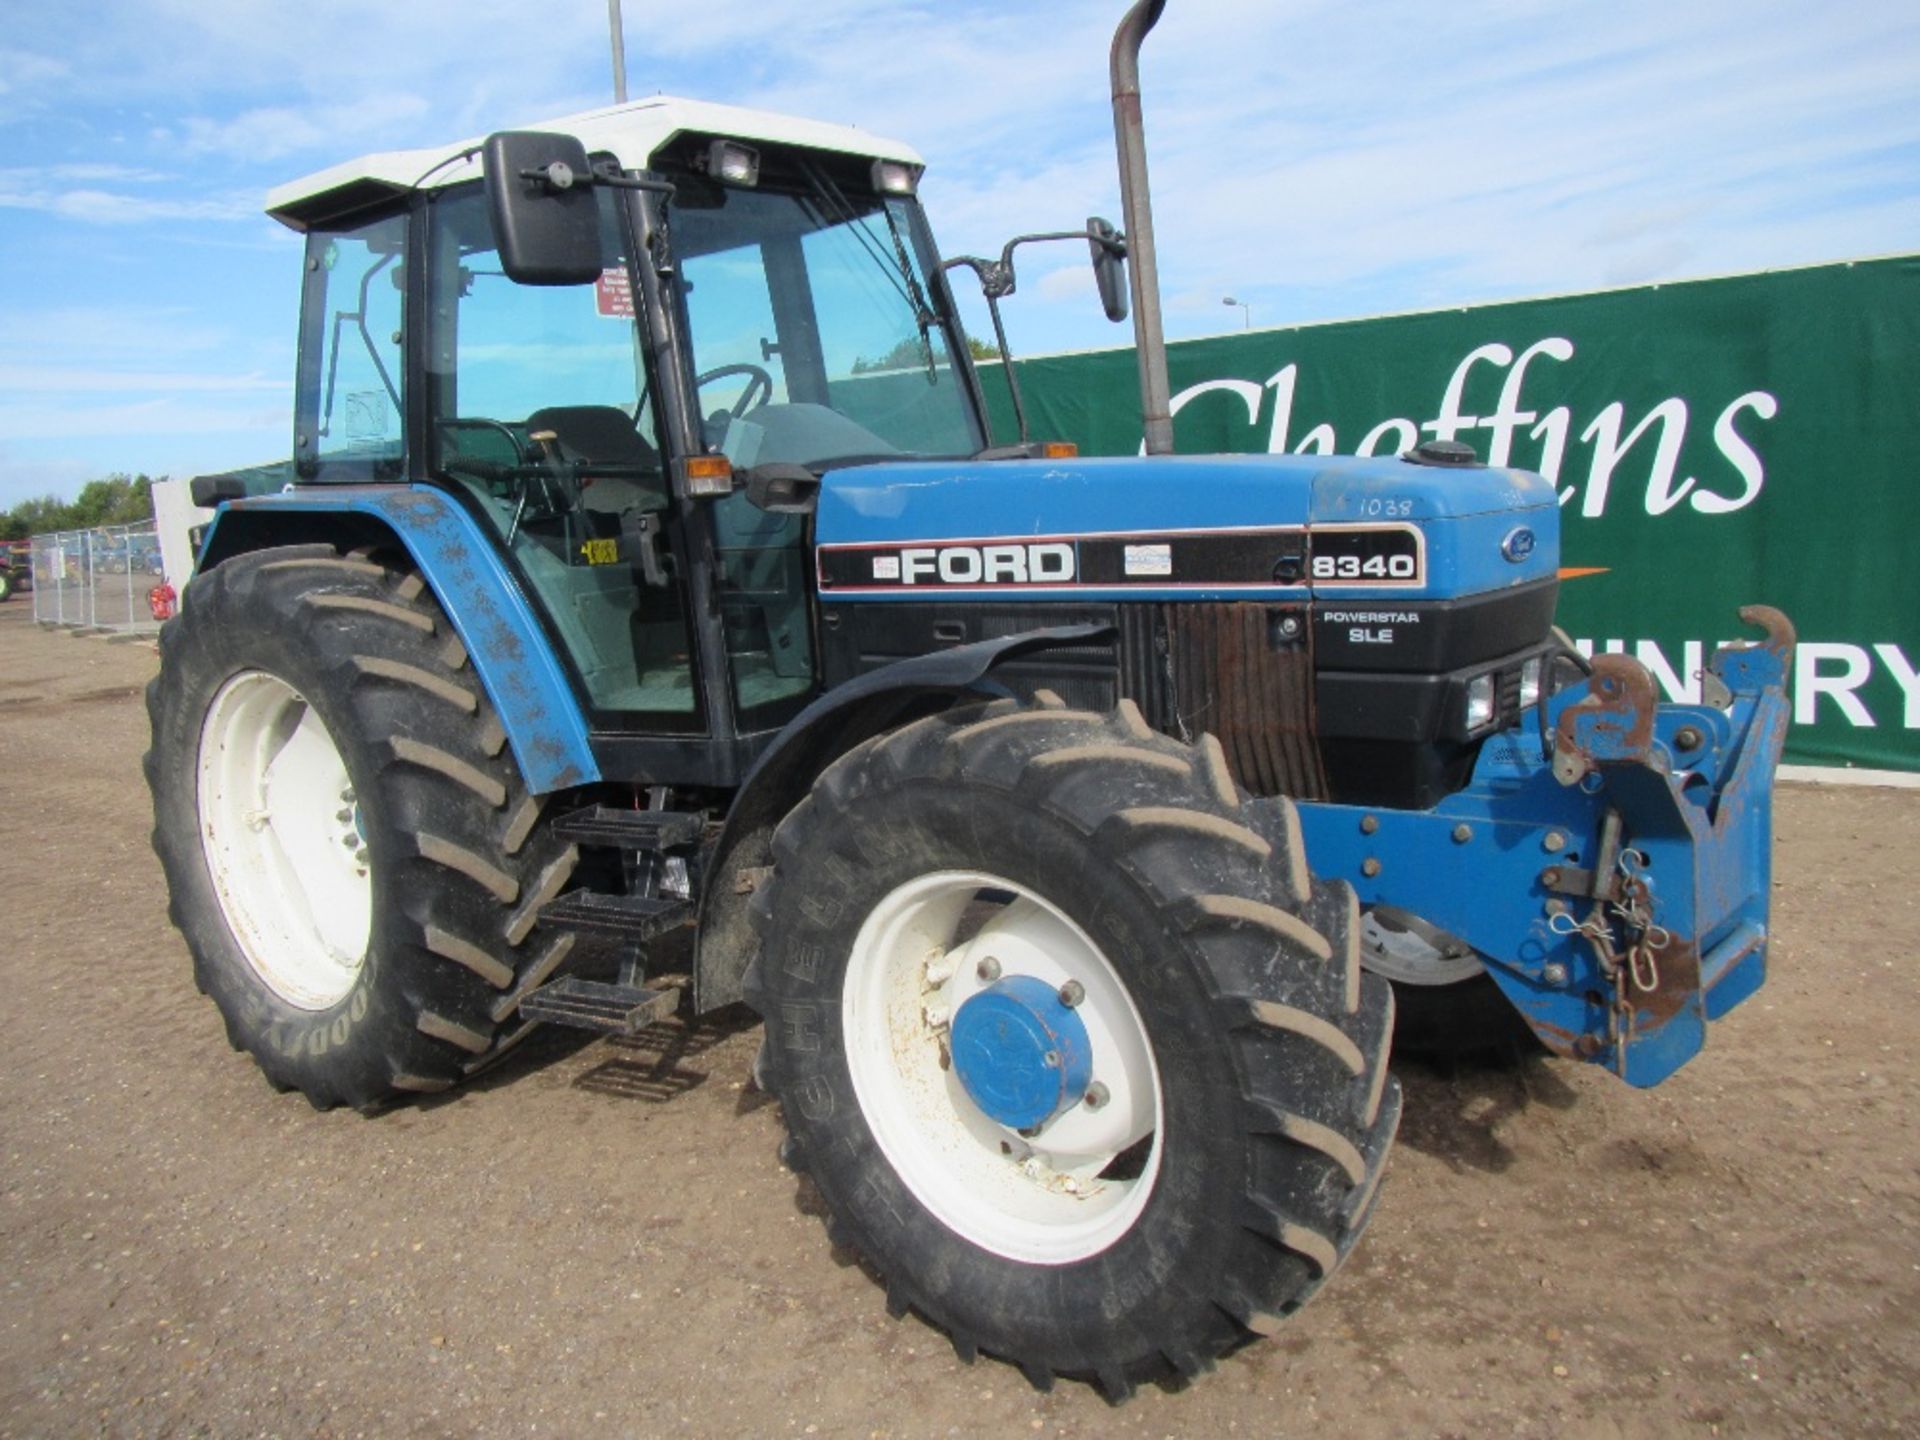 1994 Ford 8340 Powerstar SLE 4wd Tractor with Front Linkage & PTO Reg. No. L379 ELJ Ser No BD79914 - Image 3 of 18